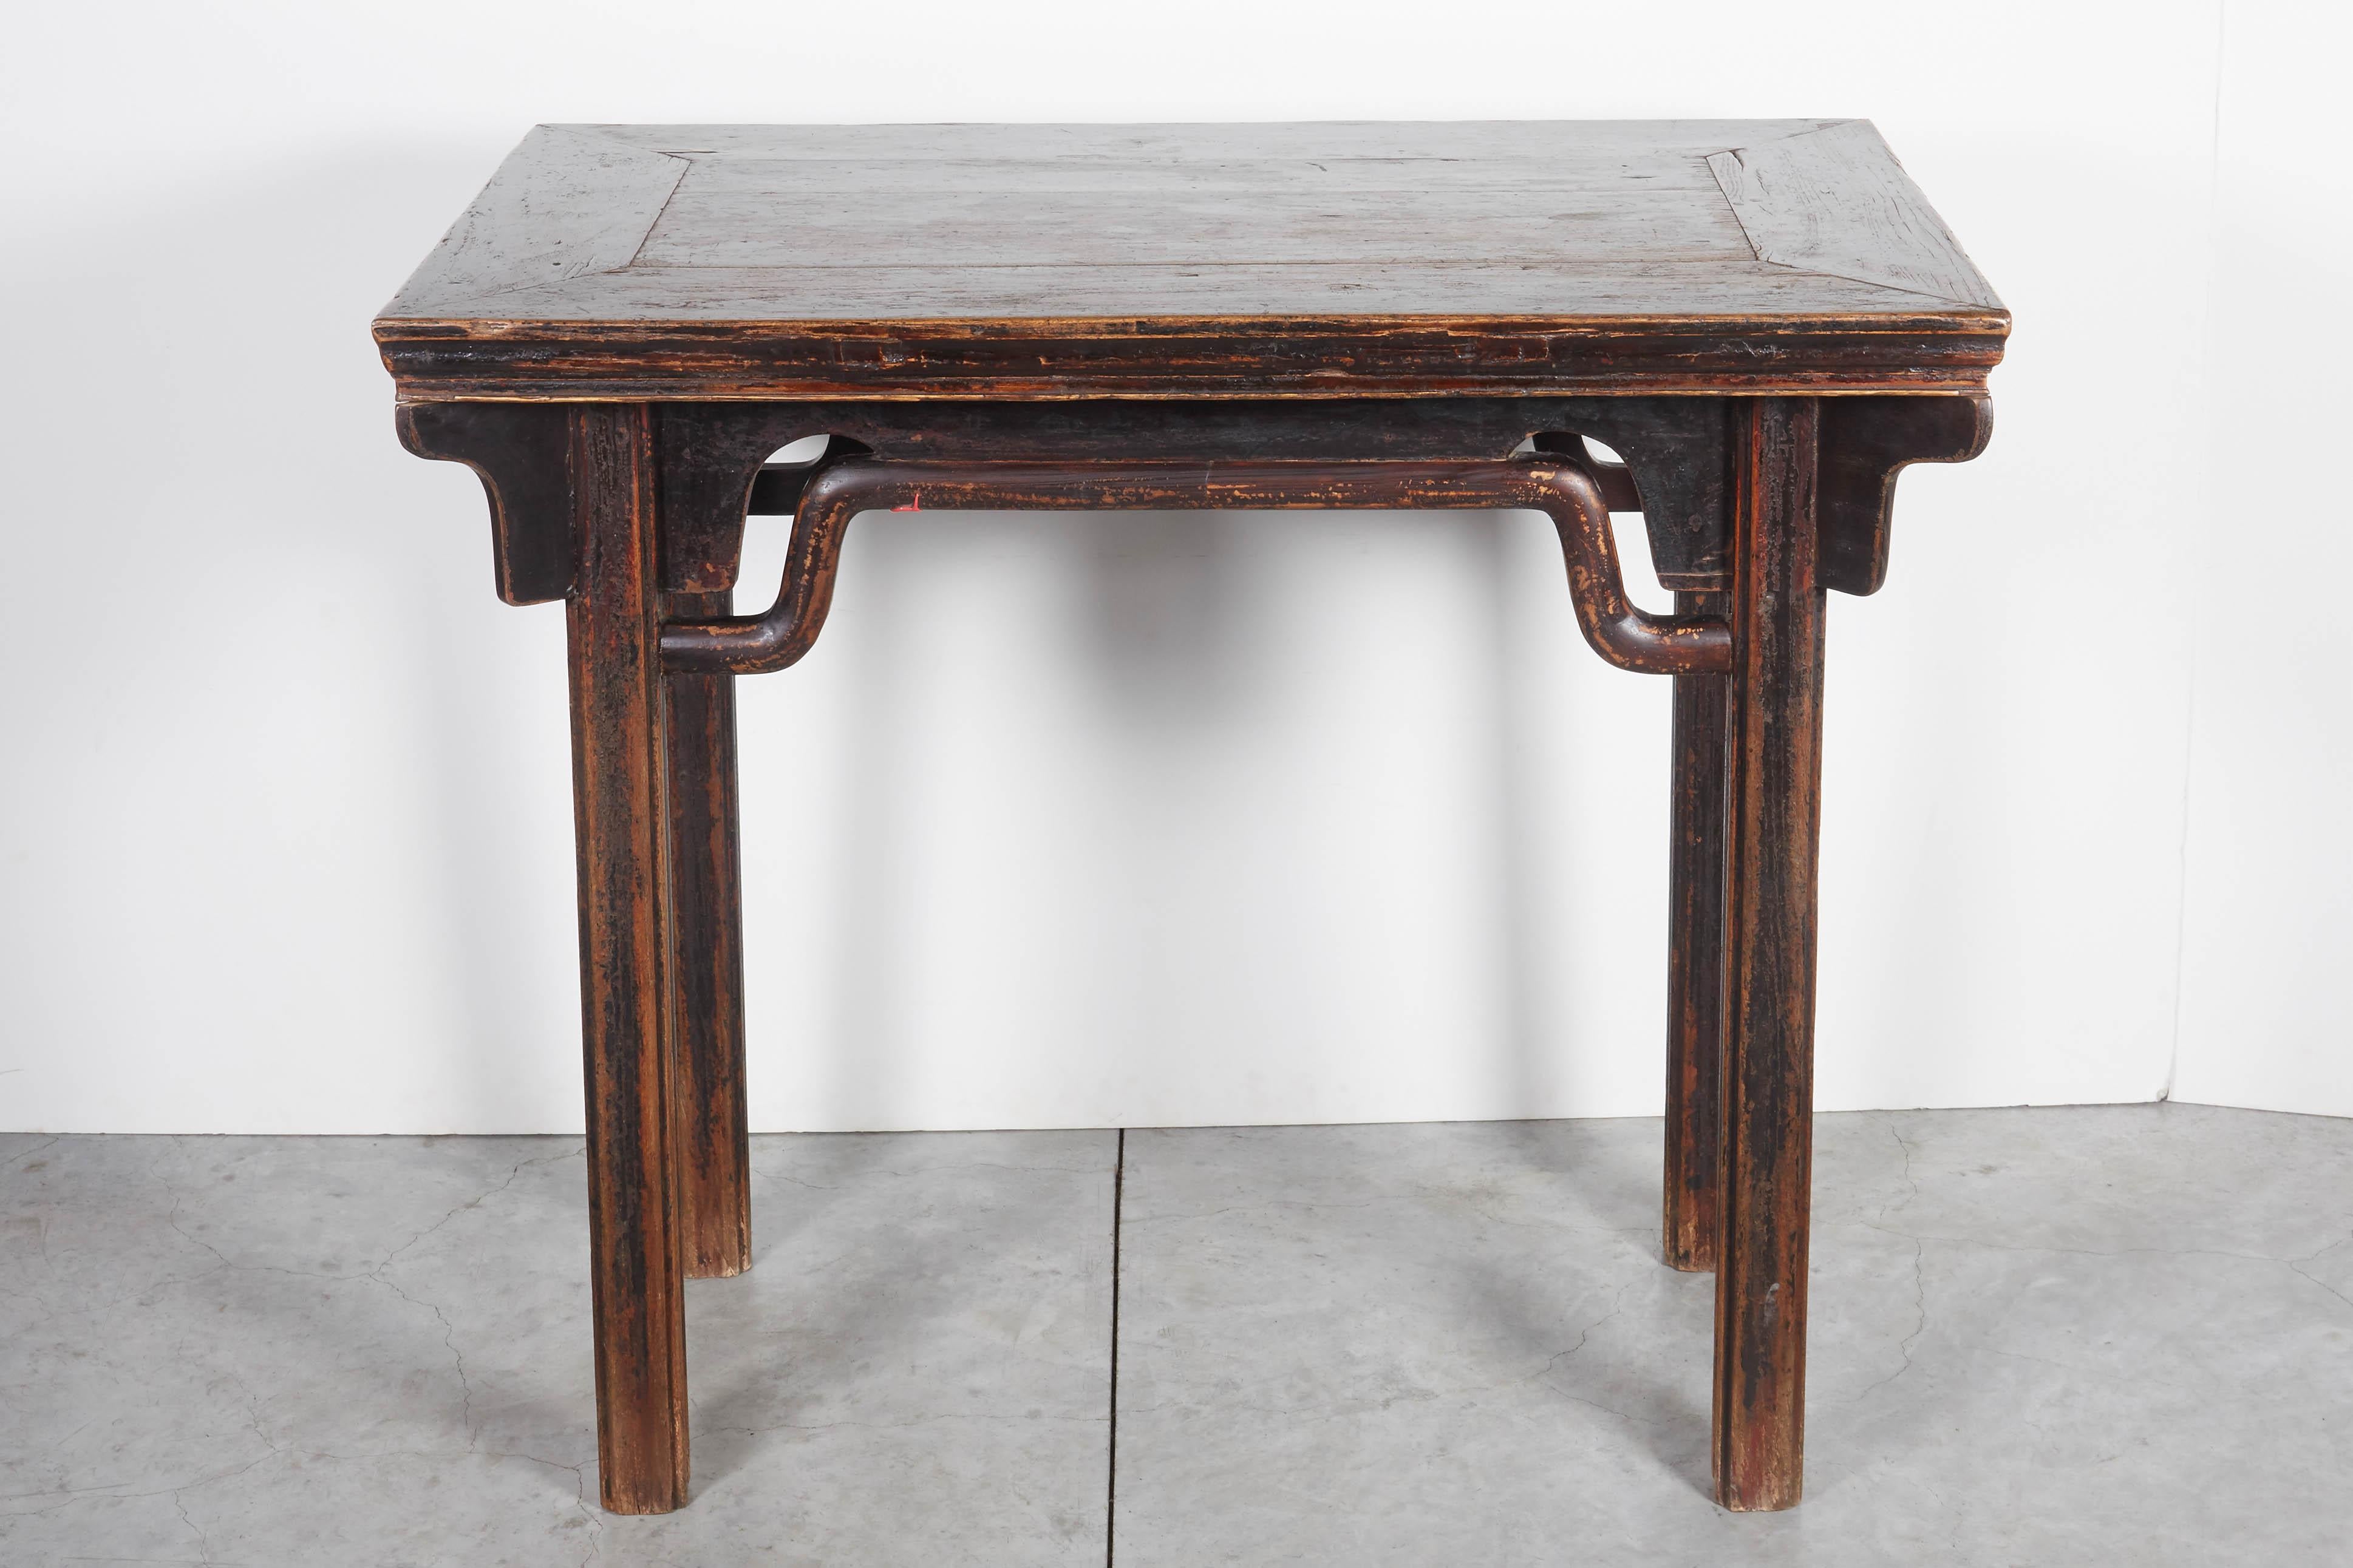 A Classic, gracefully designed antique Chinese wine table with distinctive humpback stretchers and lovely patina. This table would likely have been used as an altar in a 19th century Chinese home.
T559.